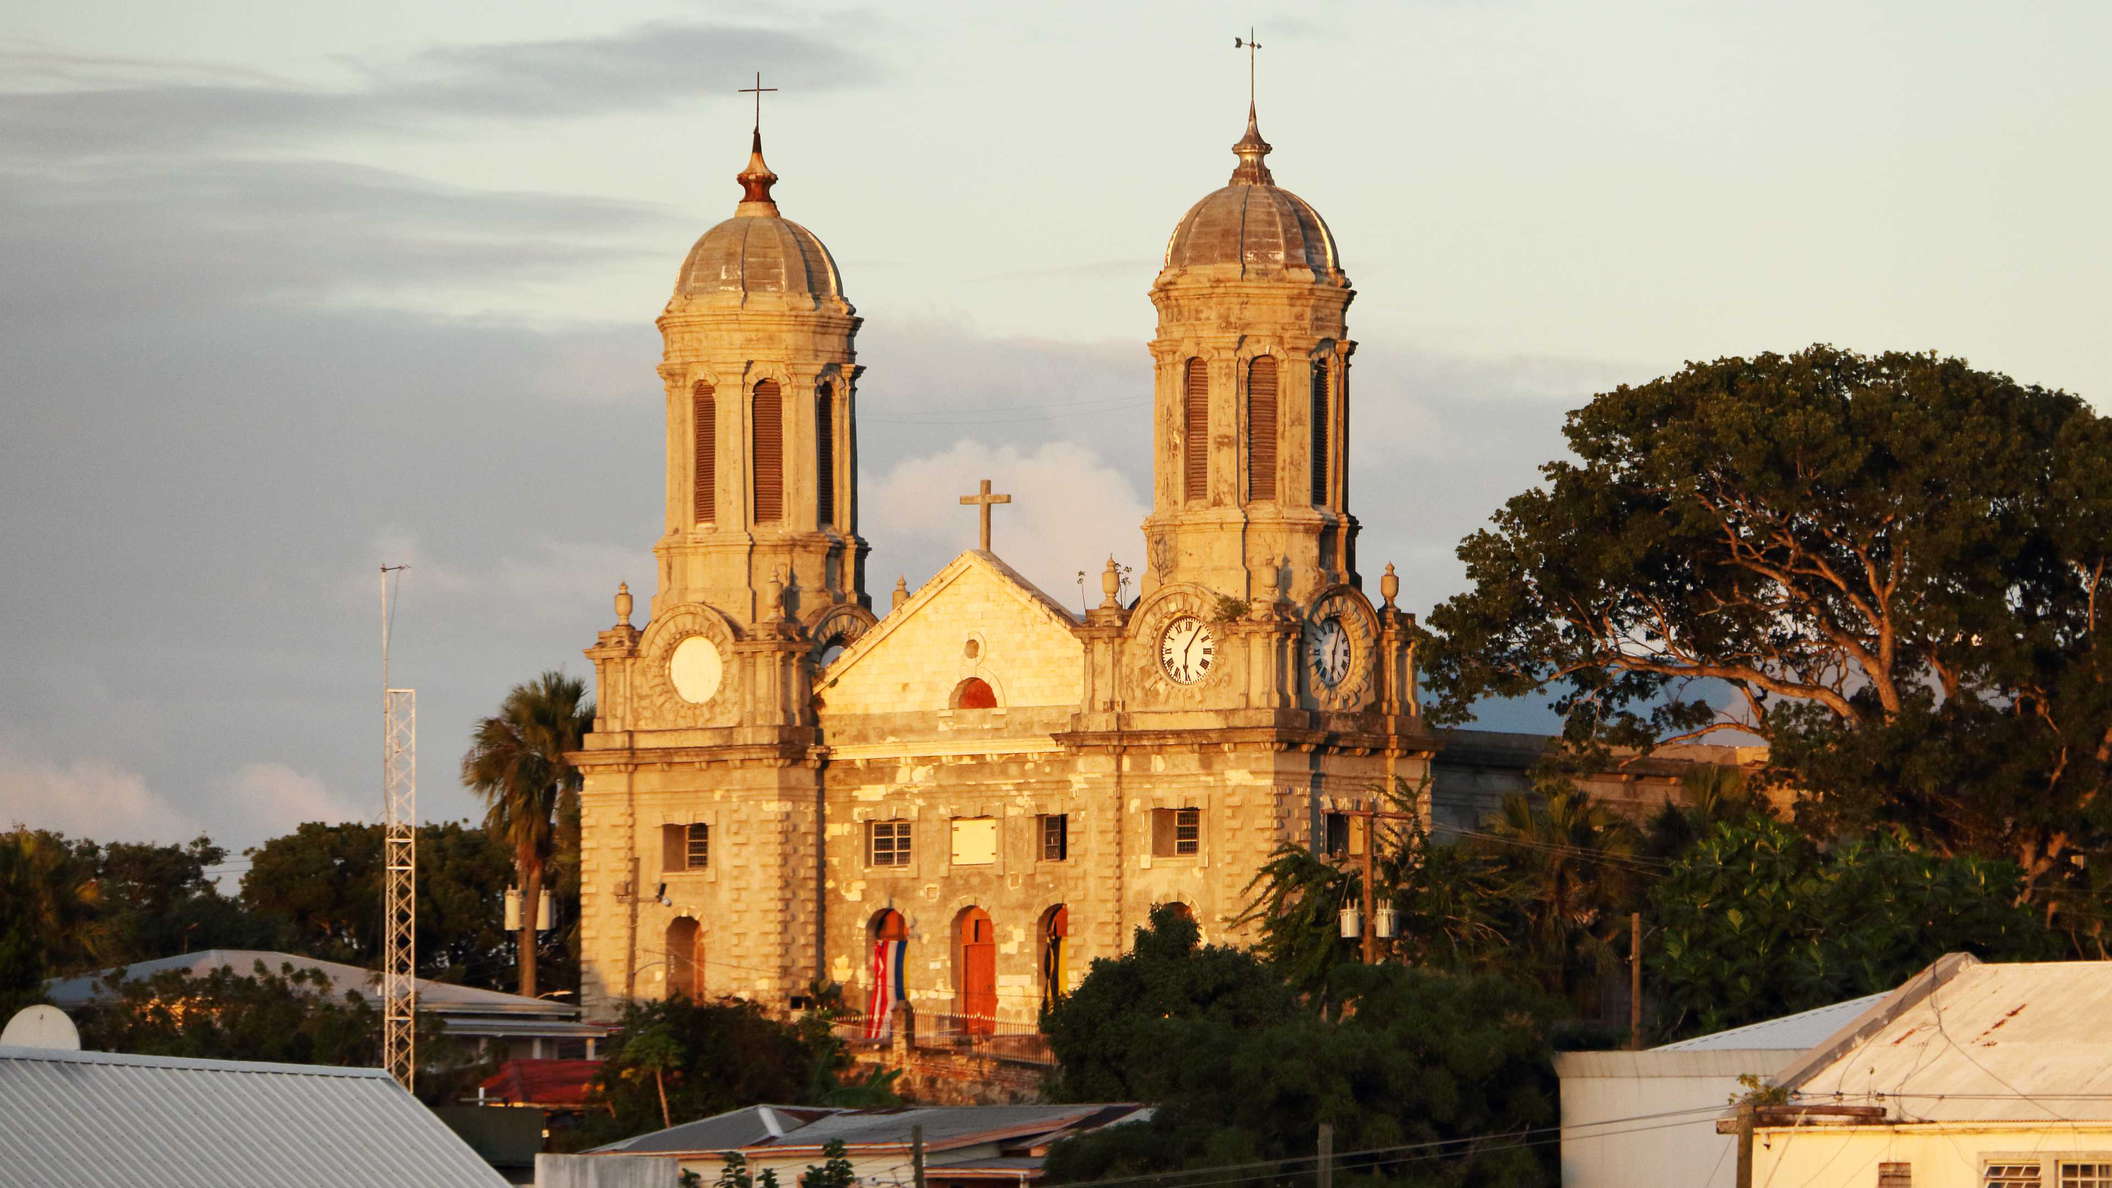 St. John's Cathedral at sunset